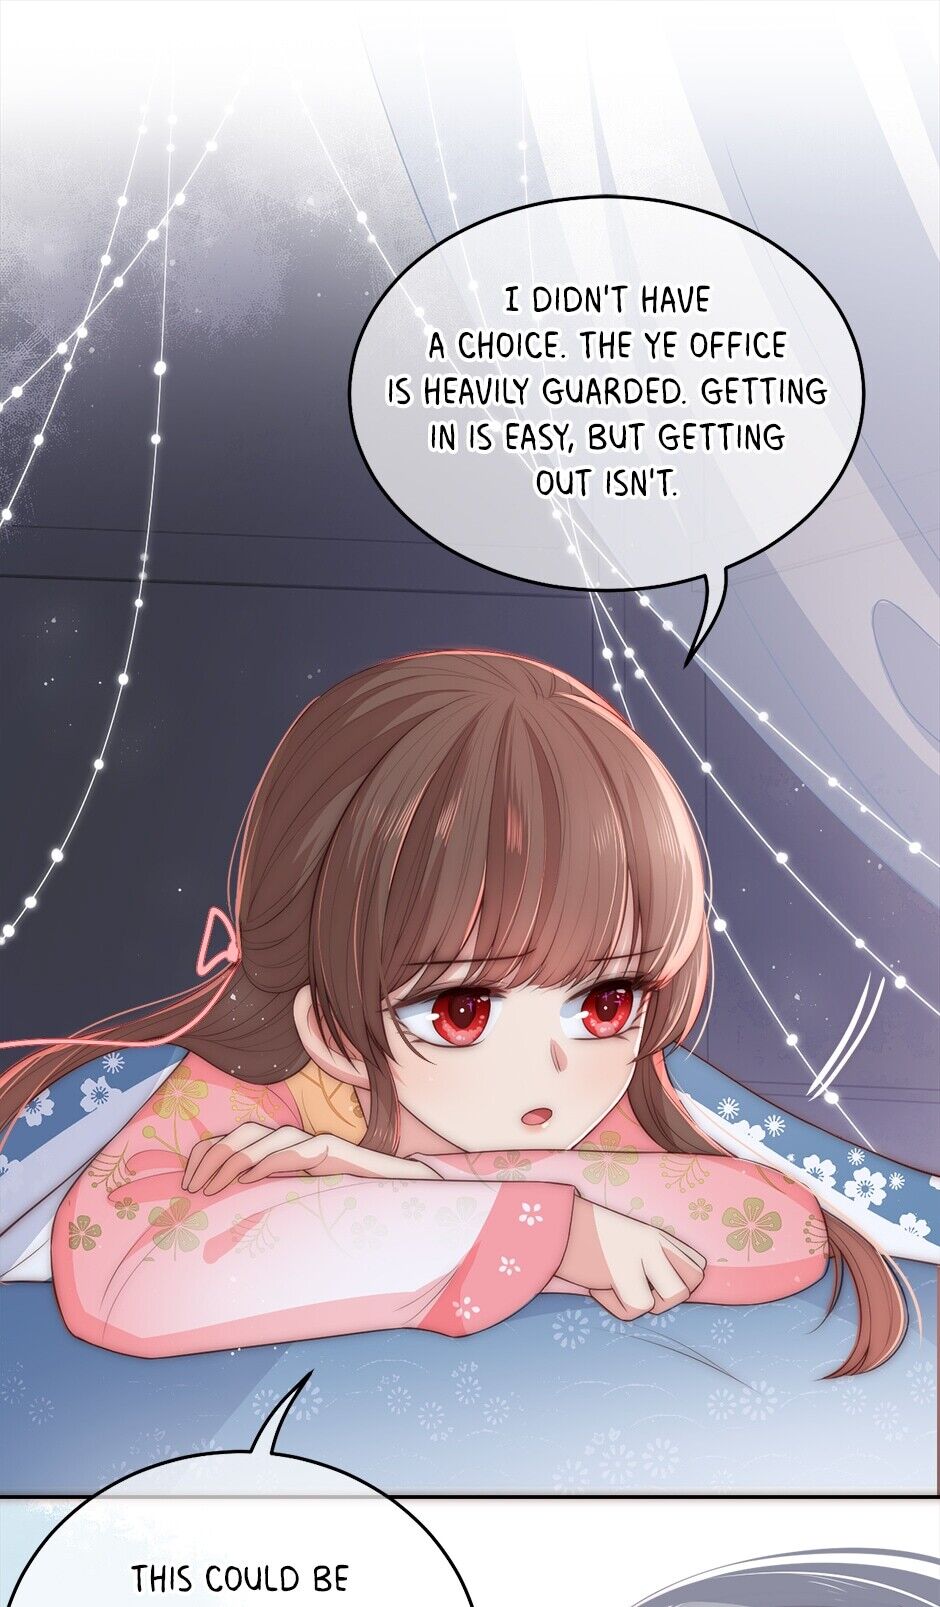 Raising The Enemy Only Brings Trouble chapter 15